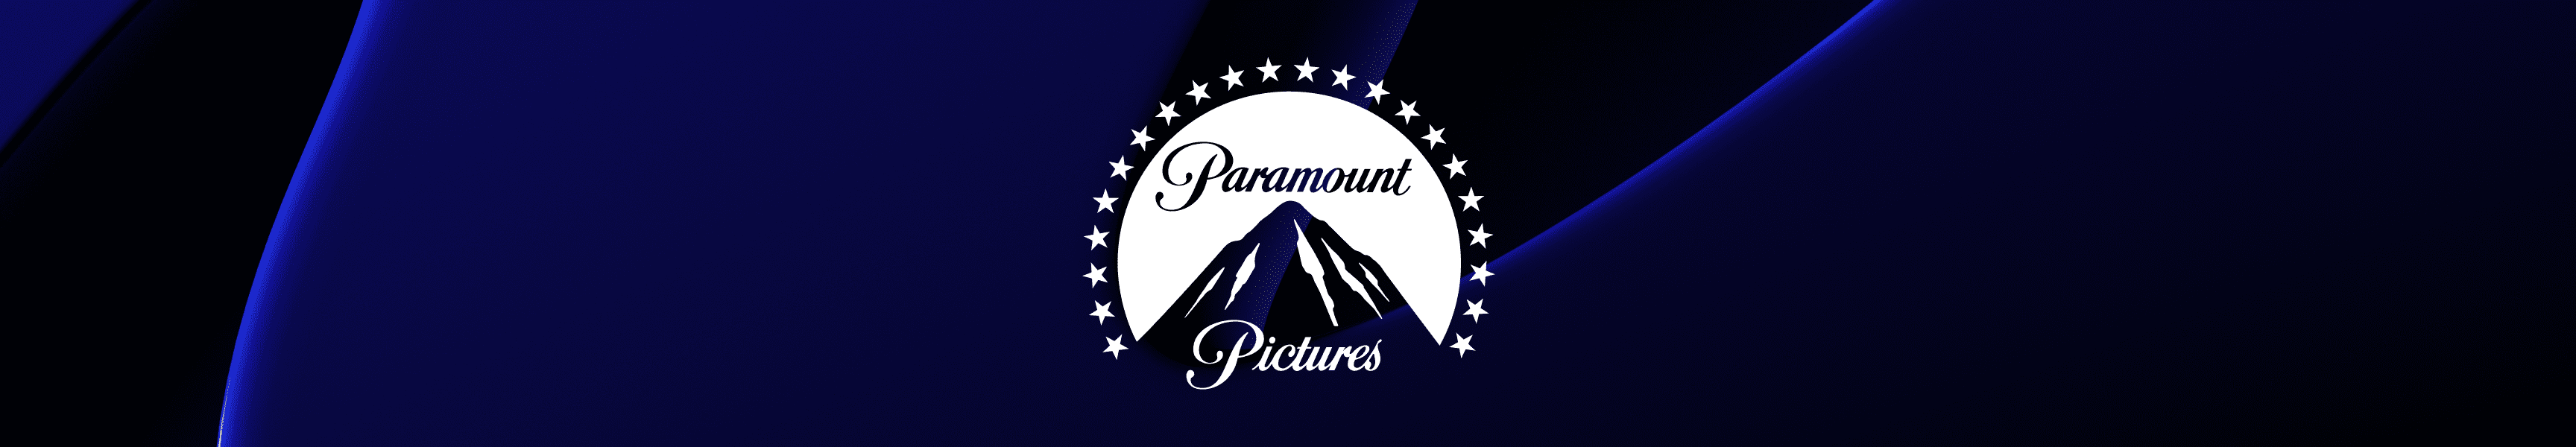 Paramount Pictures Posters